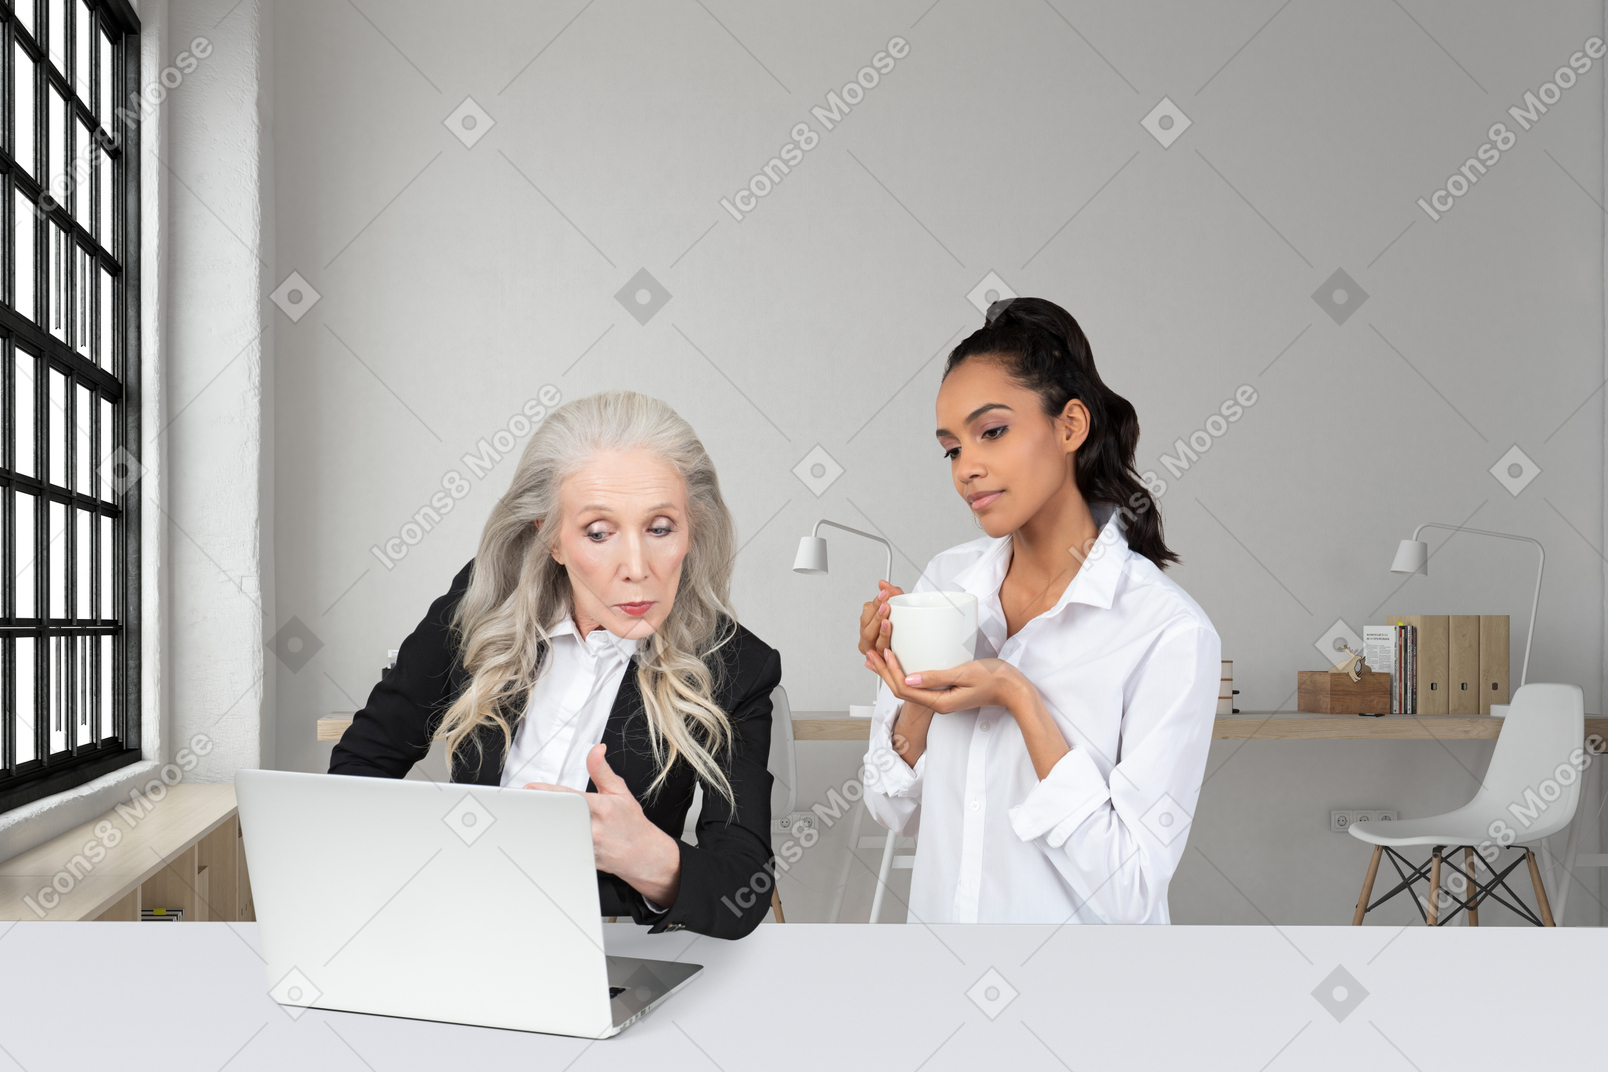 Two women sitting at a table looking at a laptop